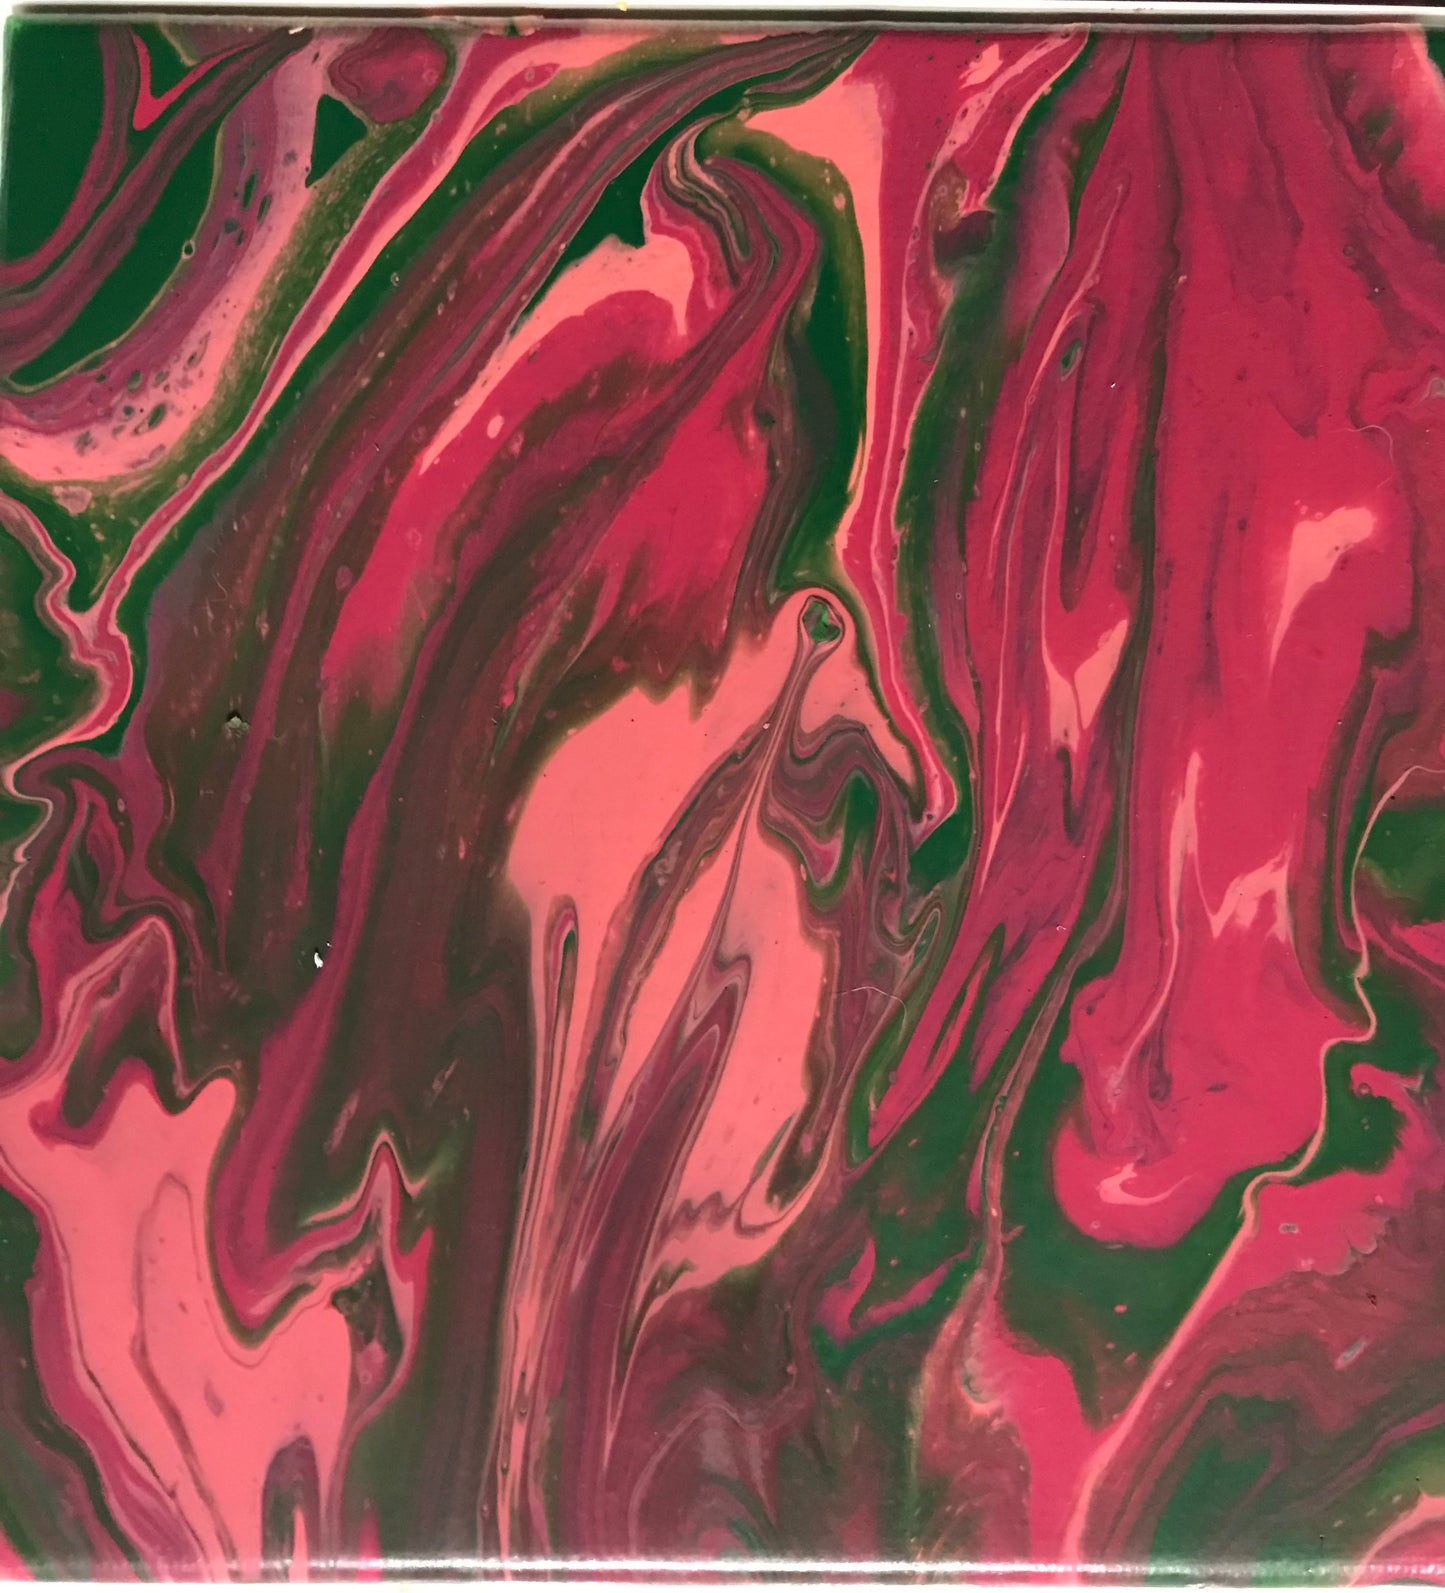 Thu, May 27, 3-5pm “Cellar Sessions: Acrylic Pour” Virtual Wine and Paint Class